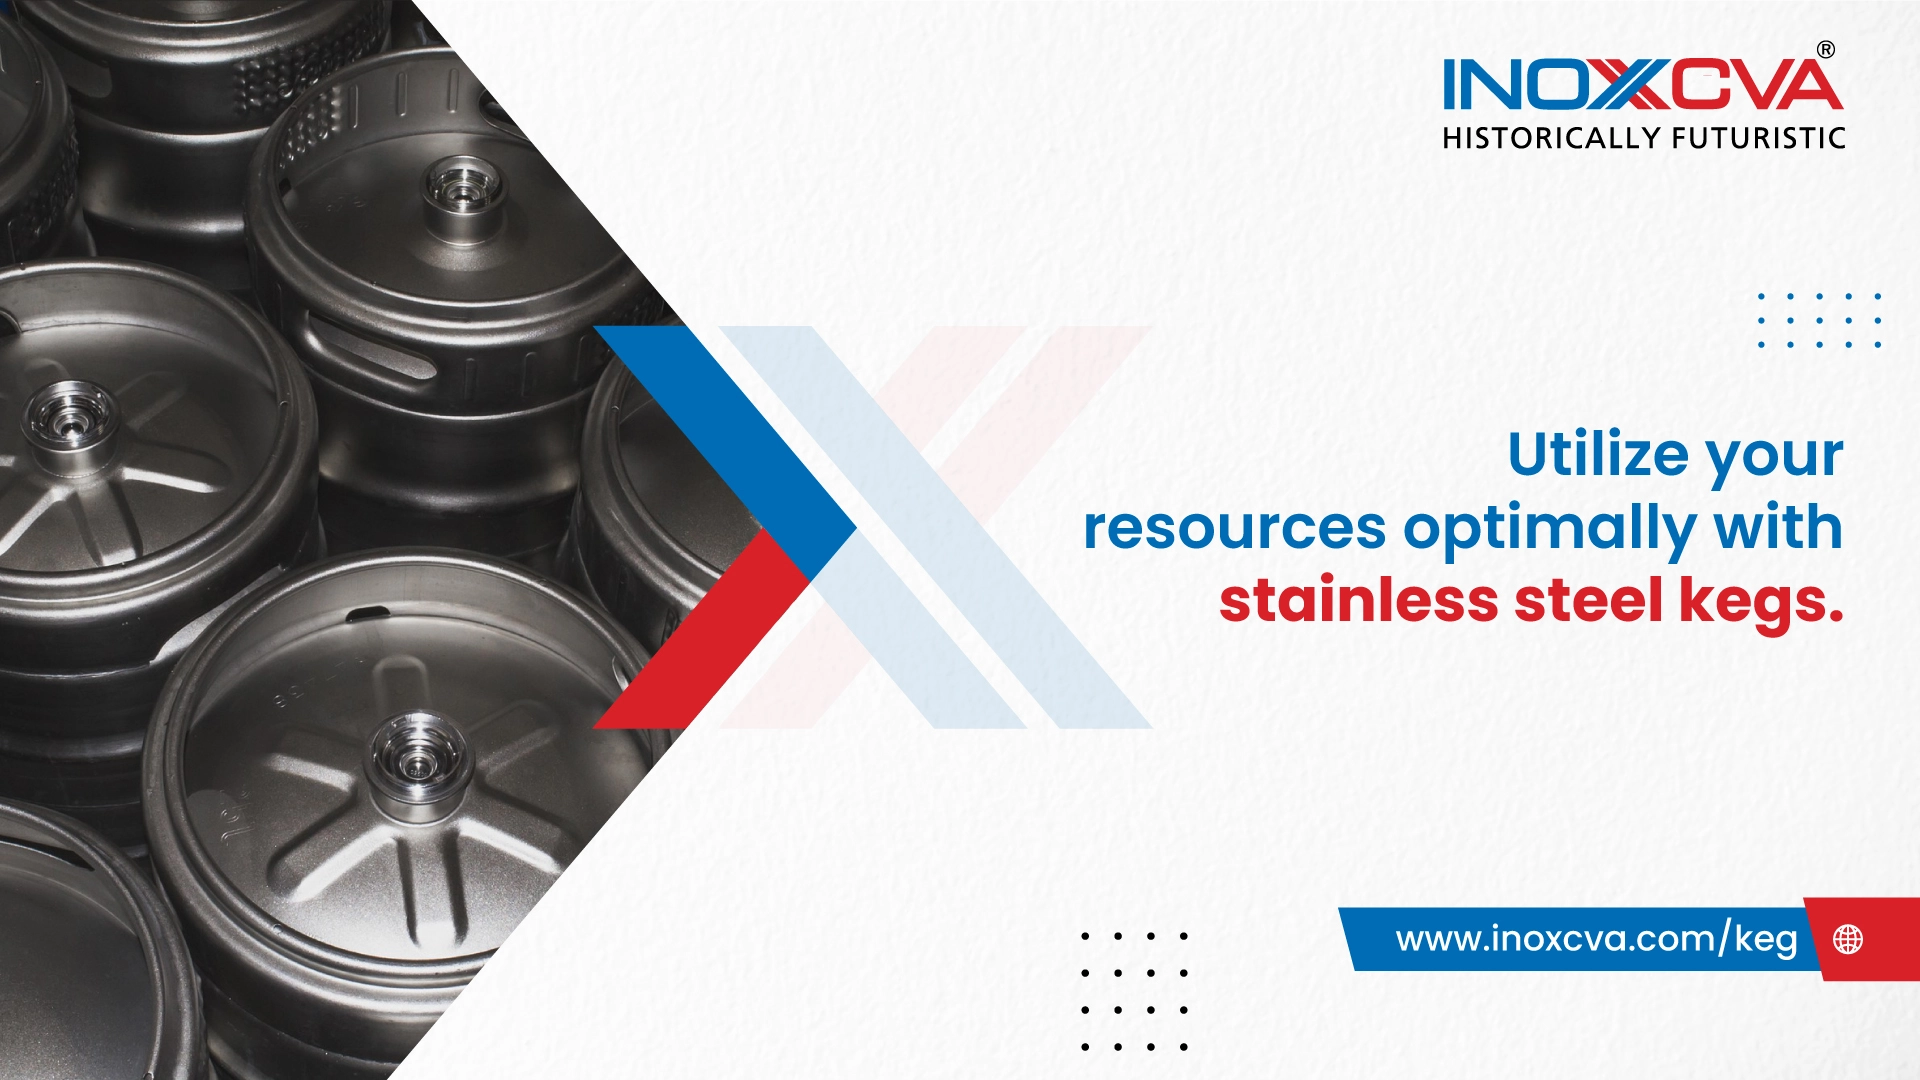  Utilize your resources optimally with stainless steel kegs.
 
